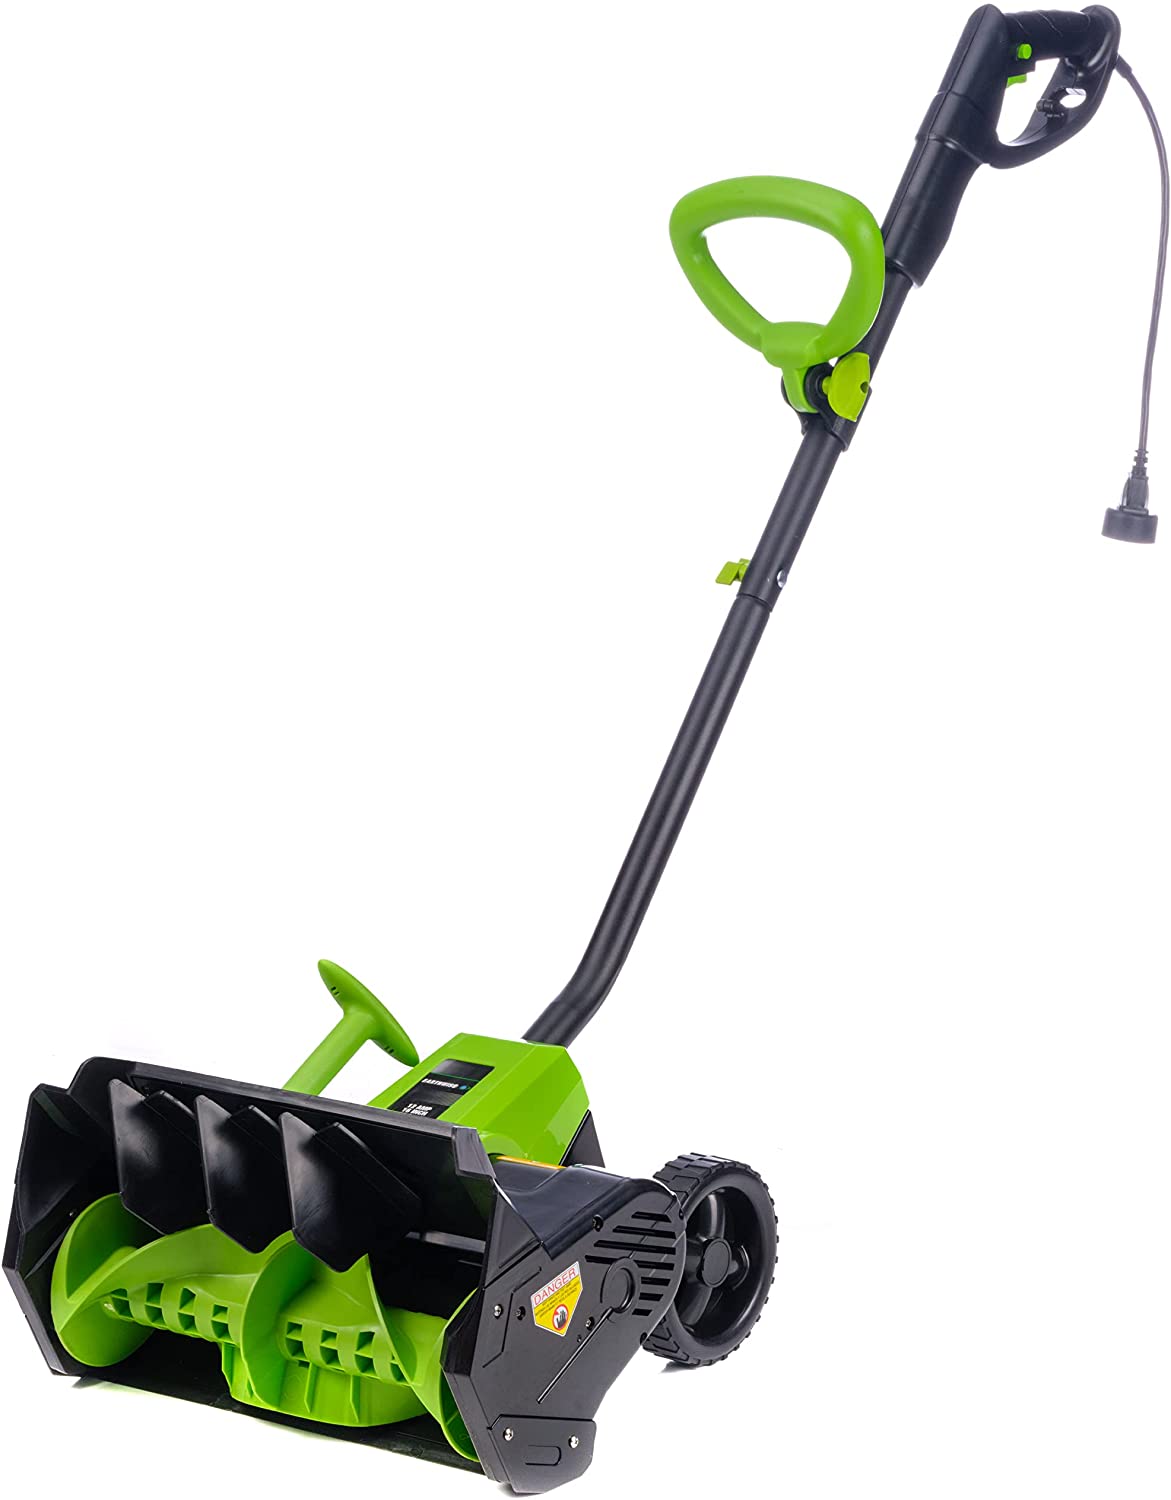 The Best Cordless & Electric Snow Blowers [2021 Reviews]